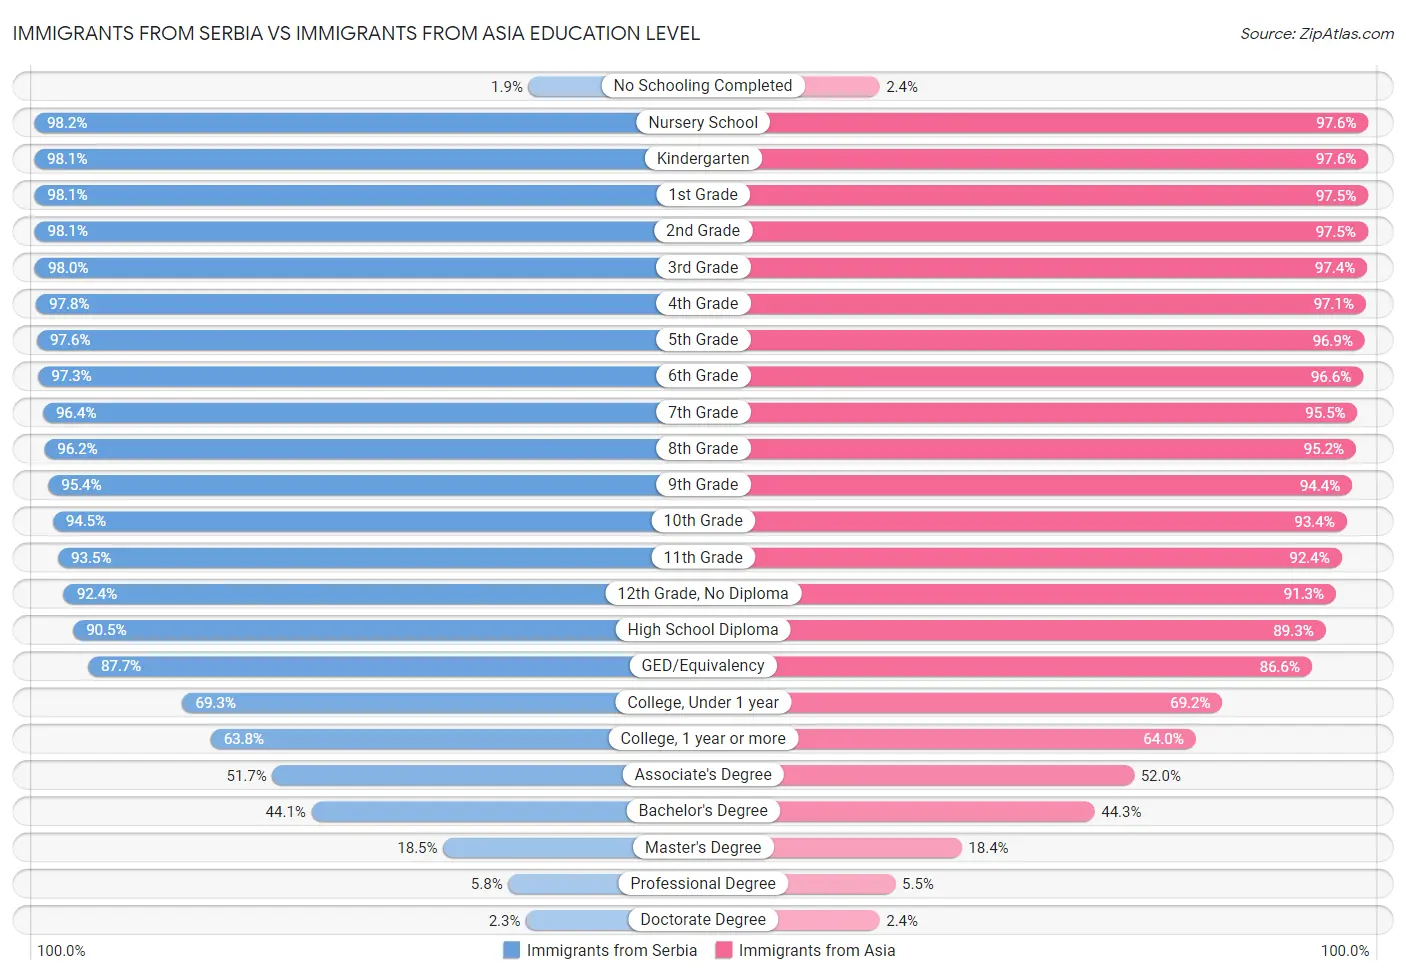 Immigrants from Serbia vs Immigrants from Asia Education Level